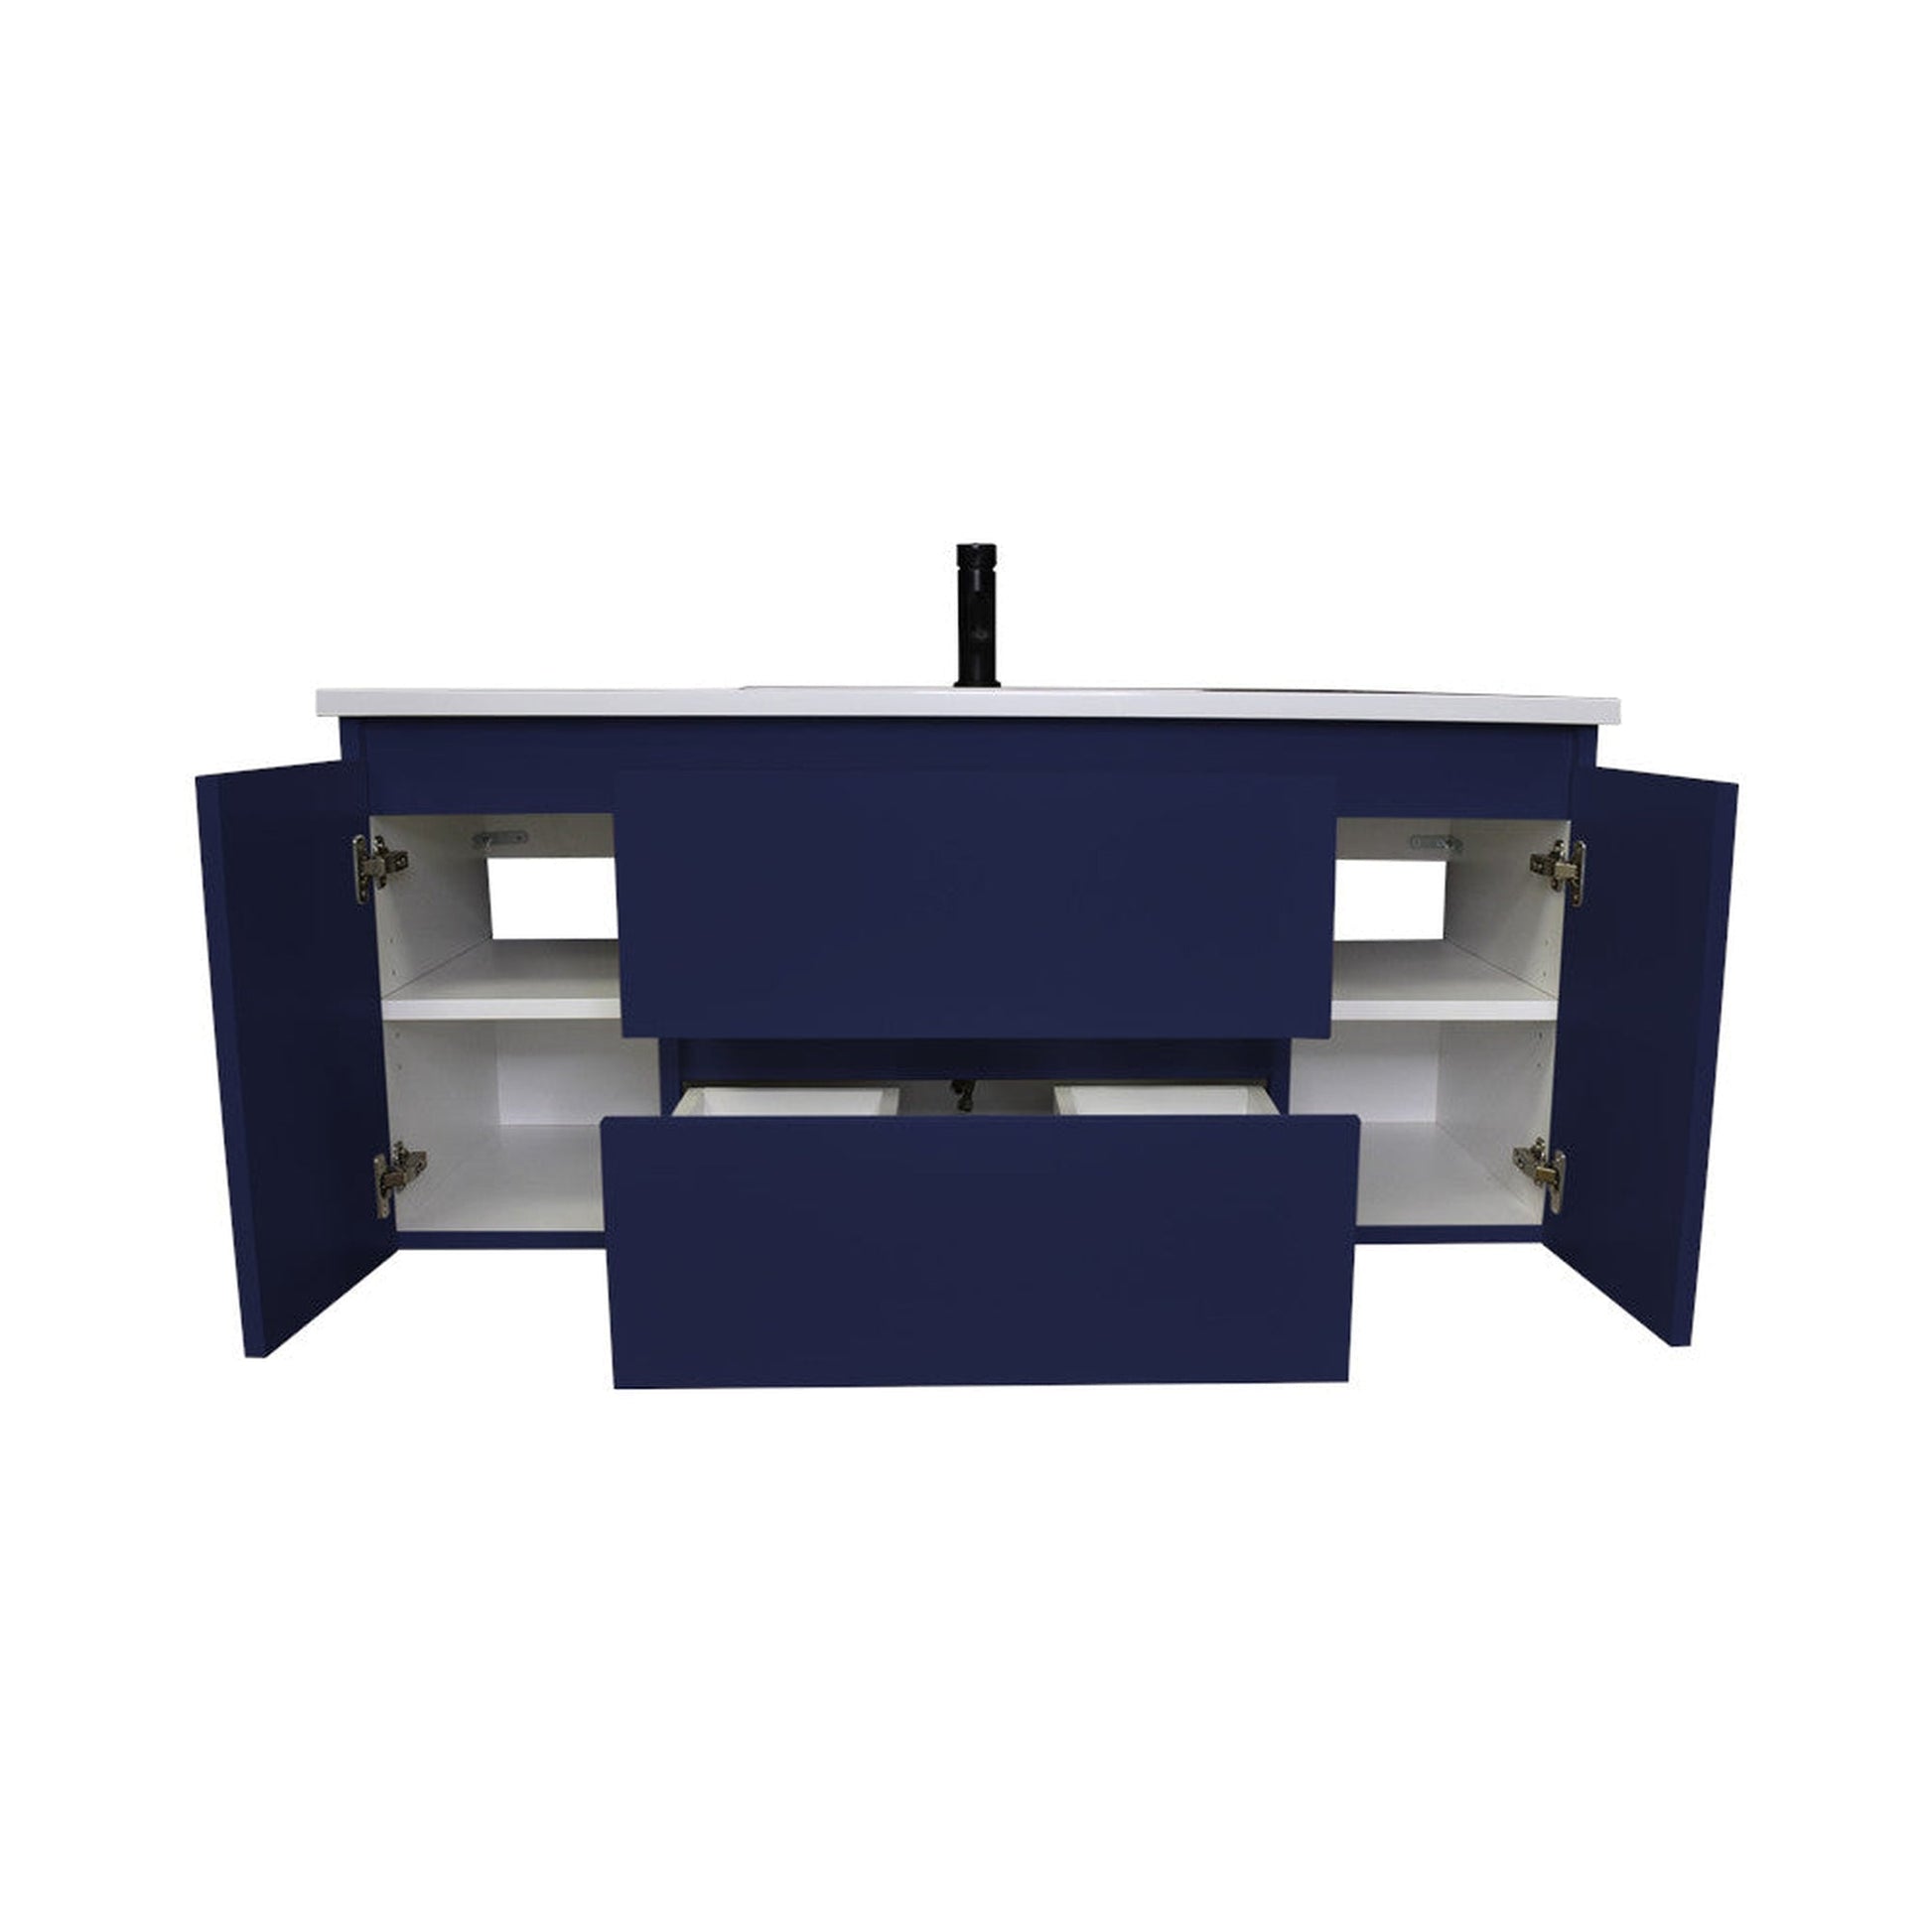 Volpa USA Salt 48" x 20" Navy Wall-Mounted Floating Bathroom Vanity With Drawers, Acrylic Top and Integrated Acrylic Sink